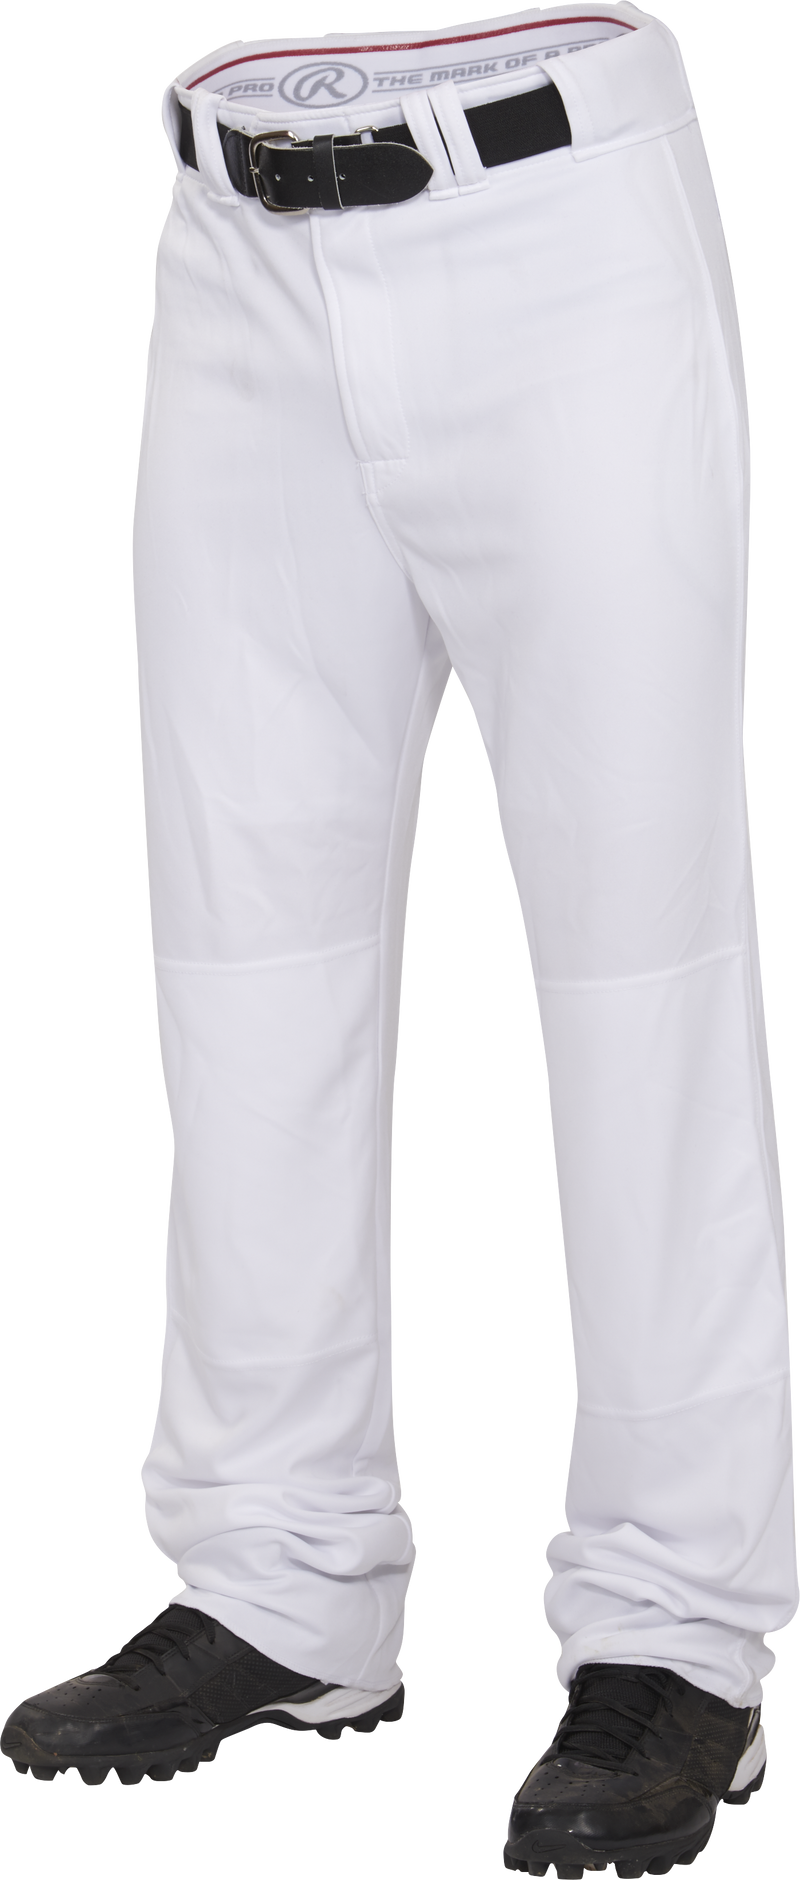 Rawlings Youth Straight Fit Pant Unhemmed